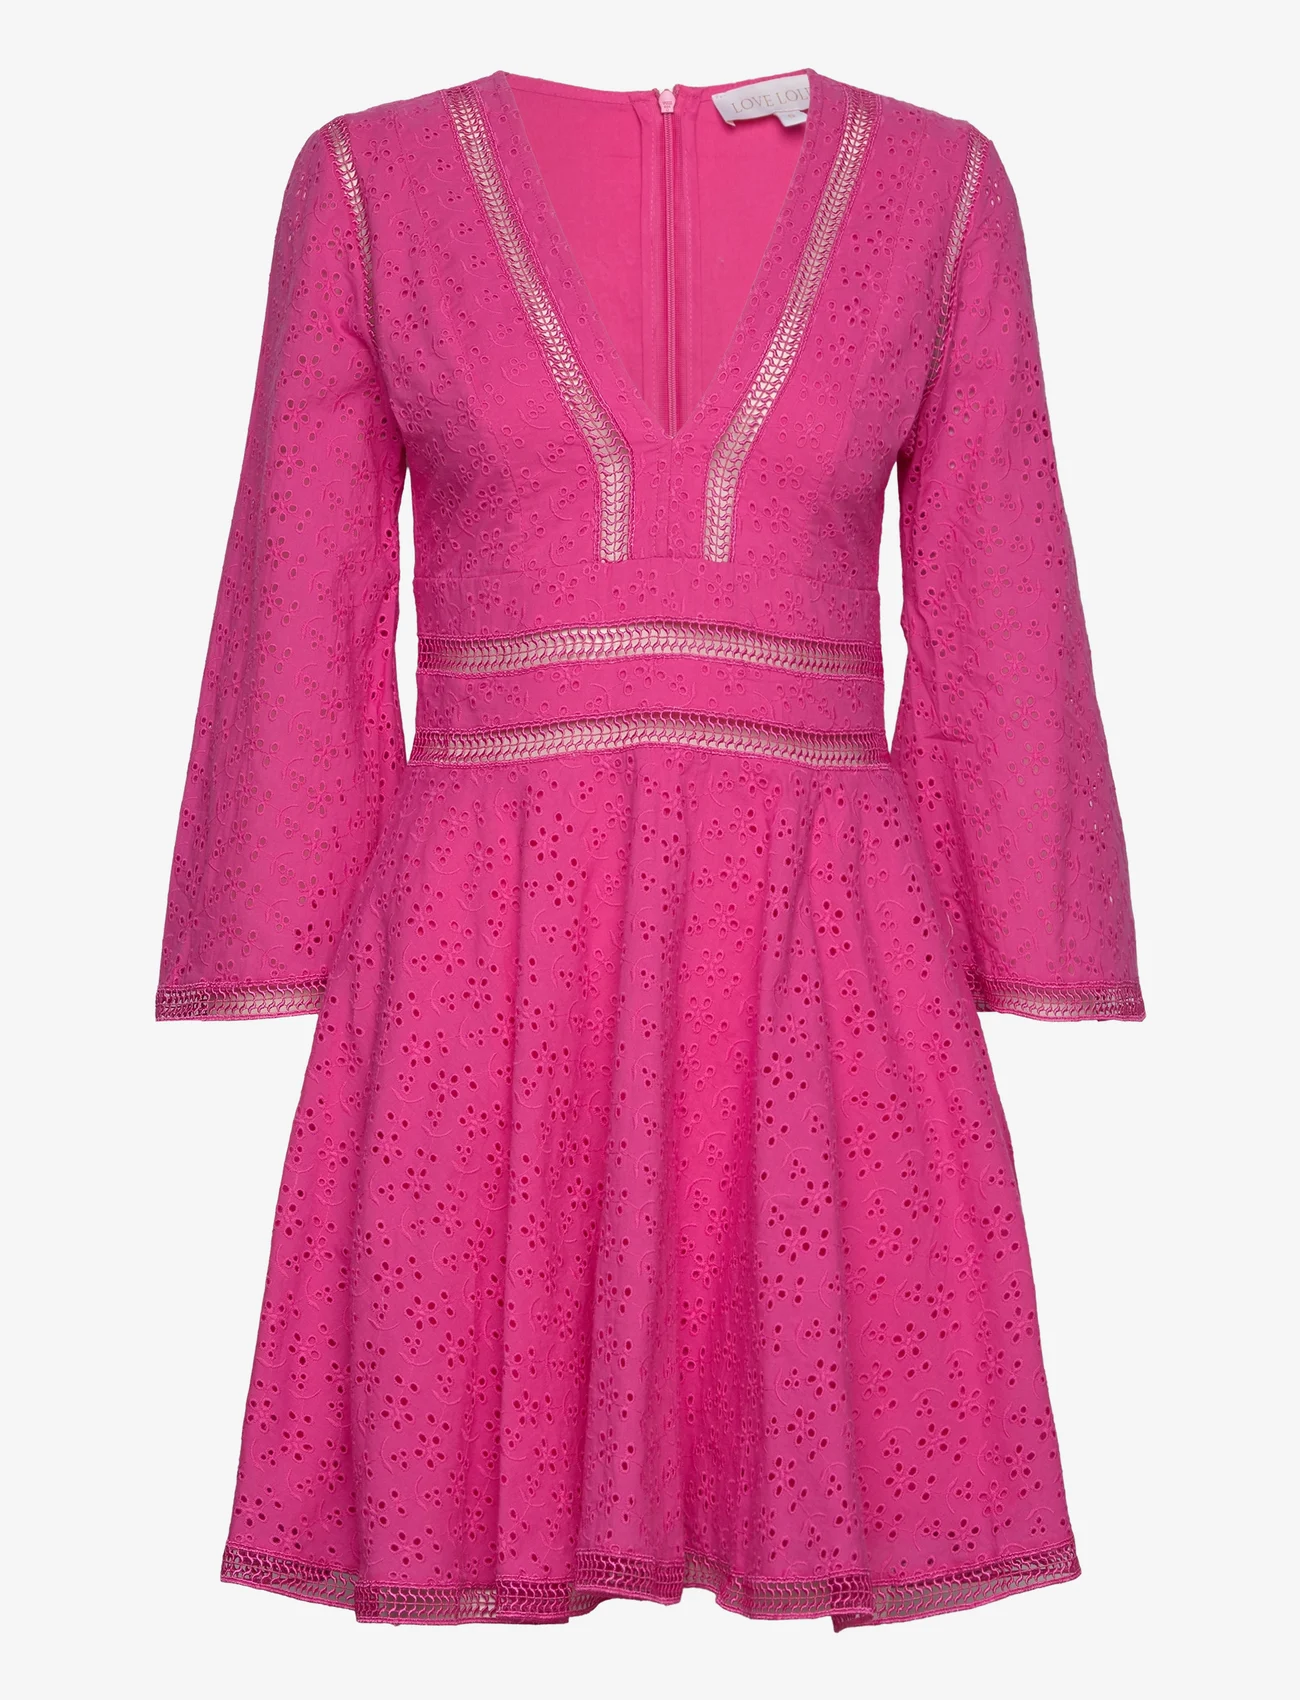 Love Lolita - Millie dress - party wear at outlet prices - lipstick pink - 0